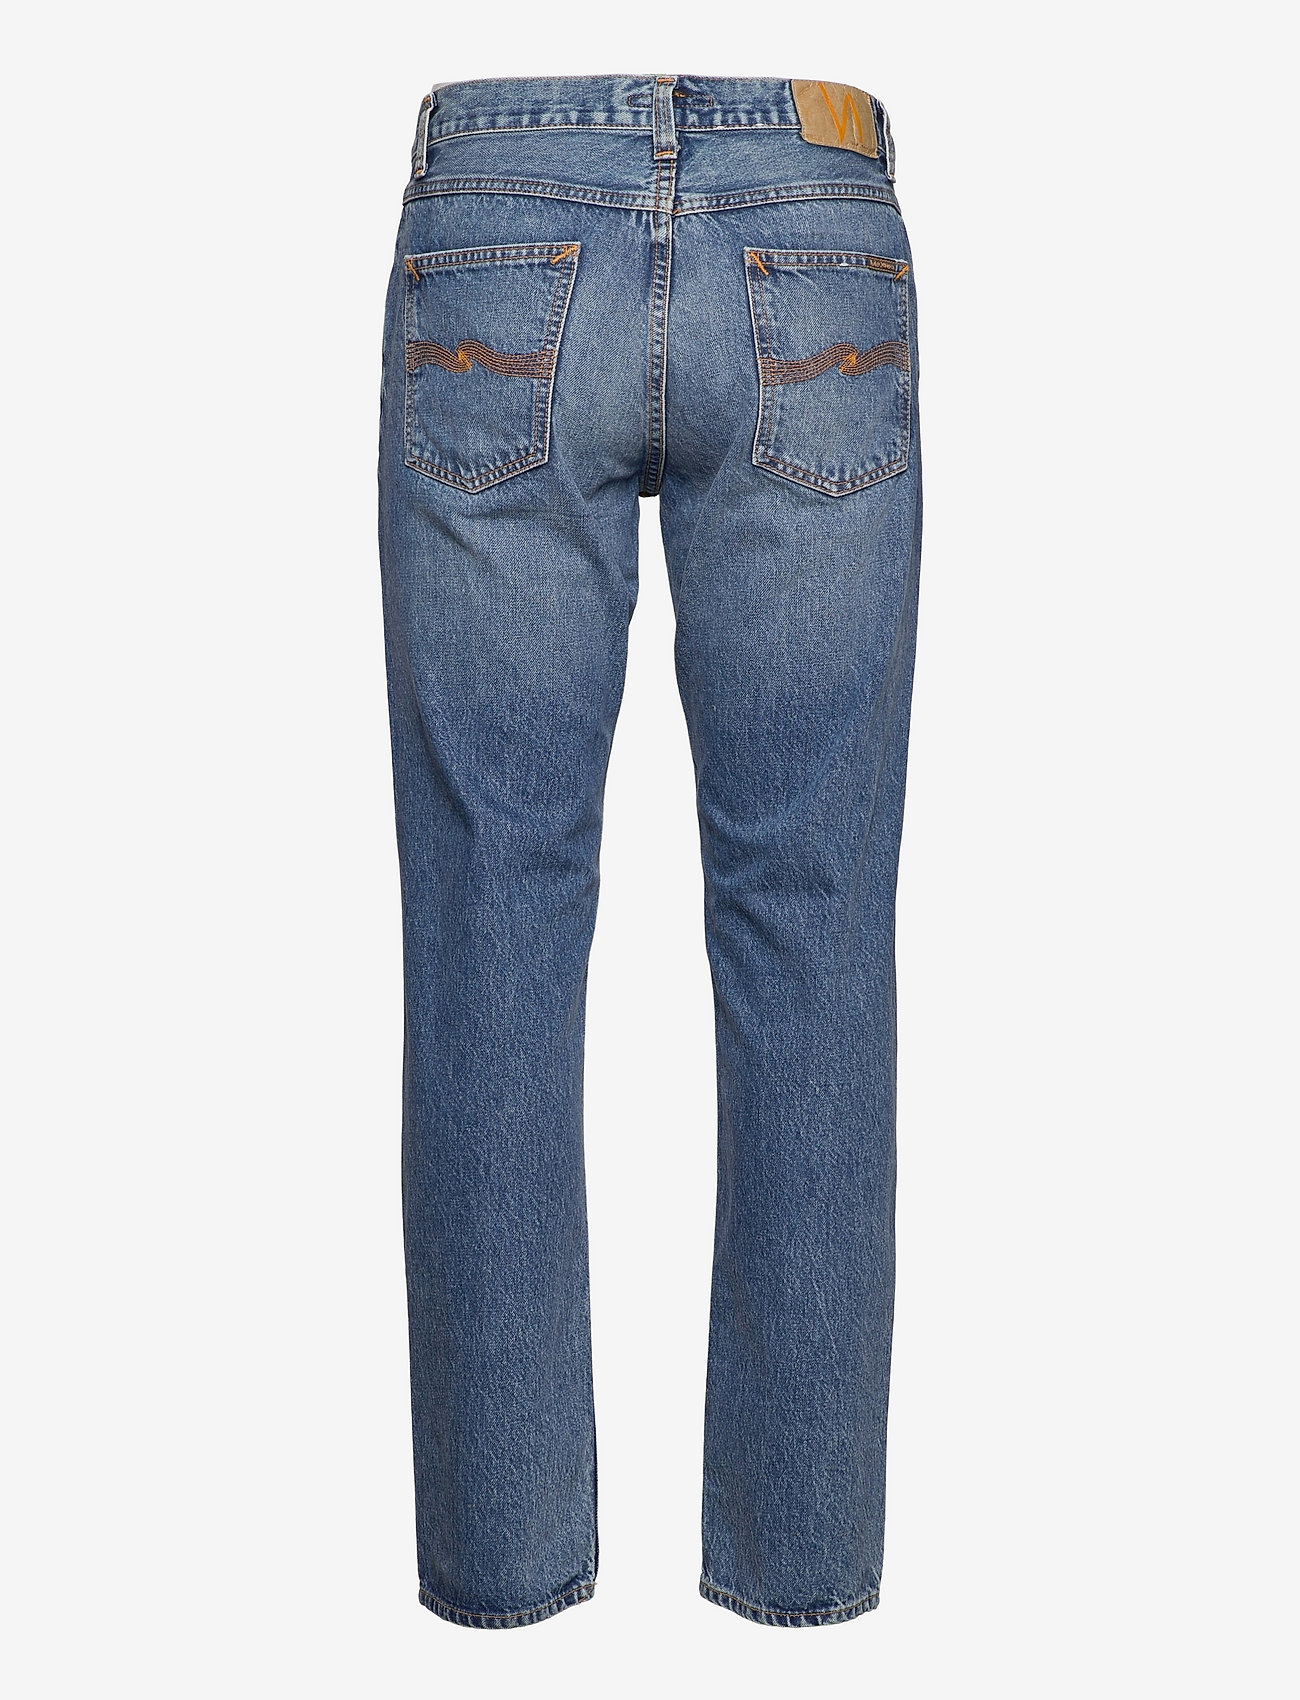 Nudie Jeans - Gritty Jackson - regular jeans - far out - 2